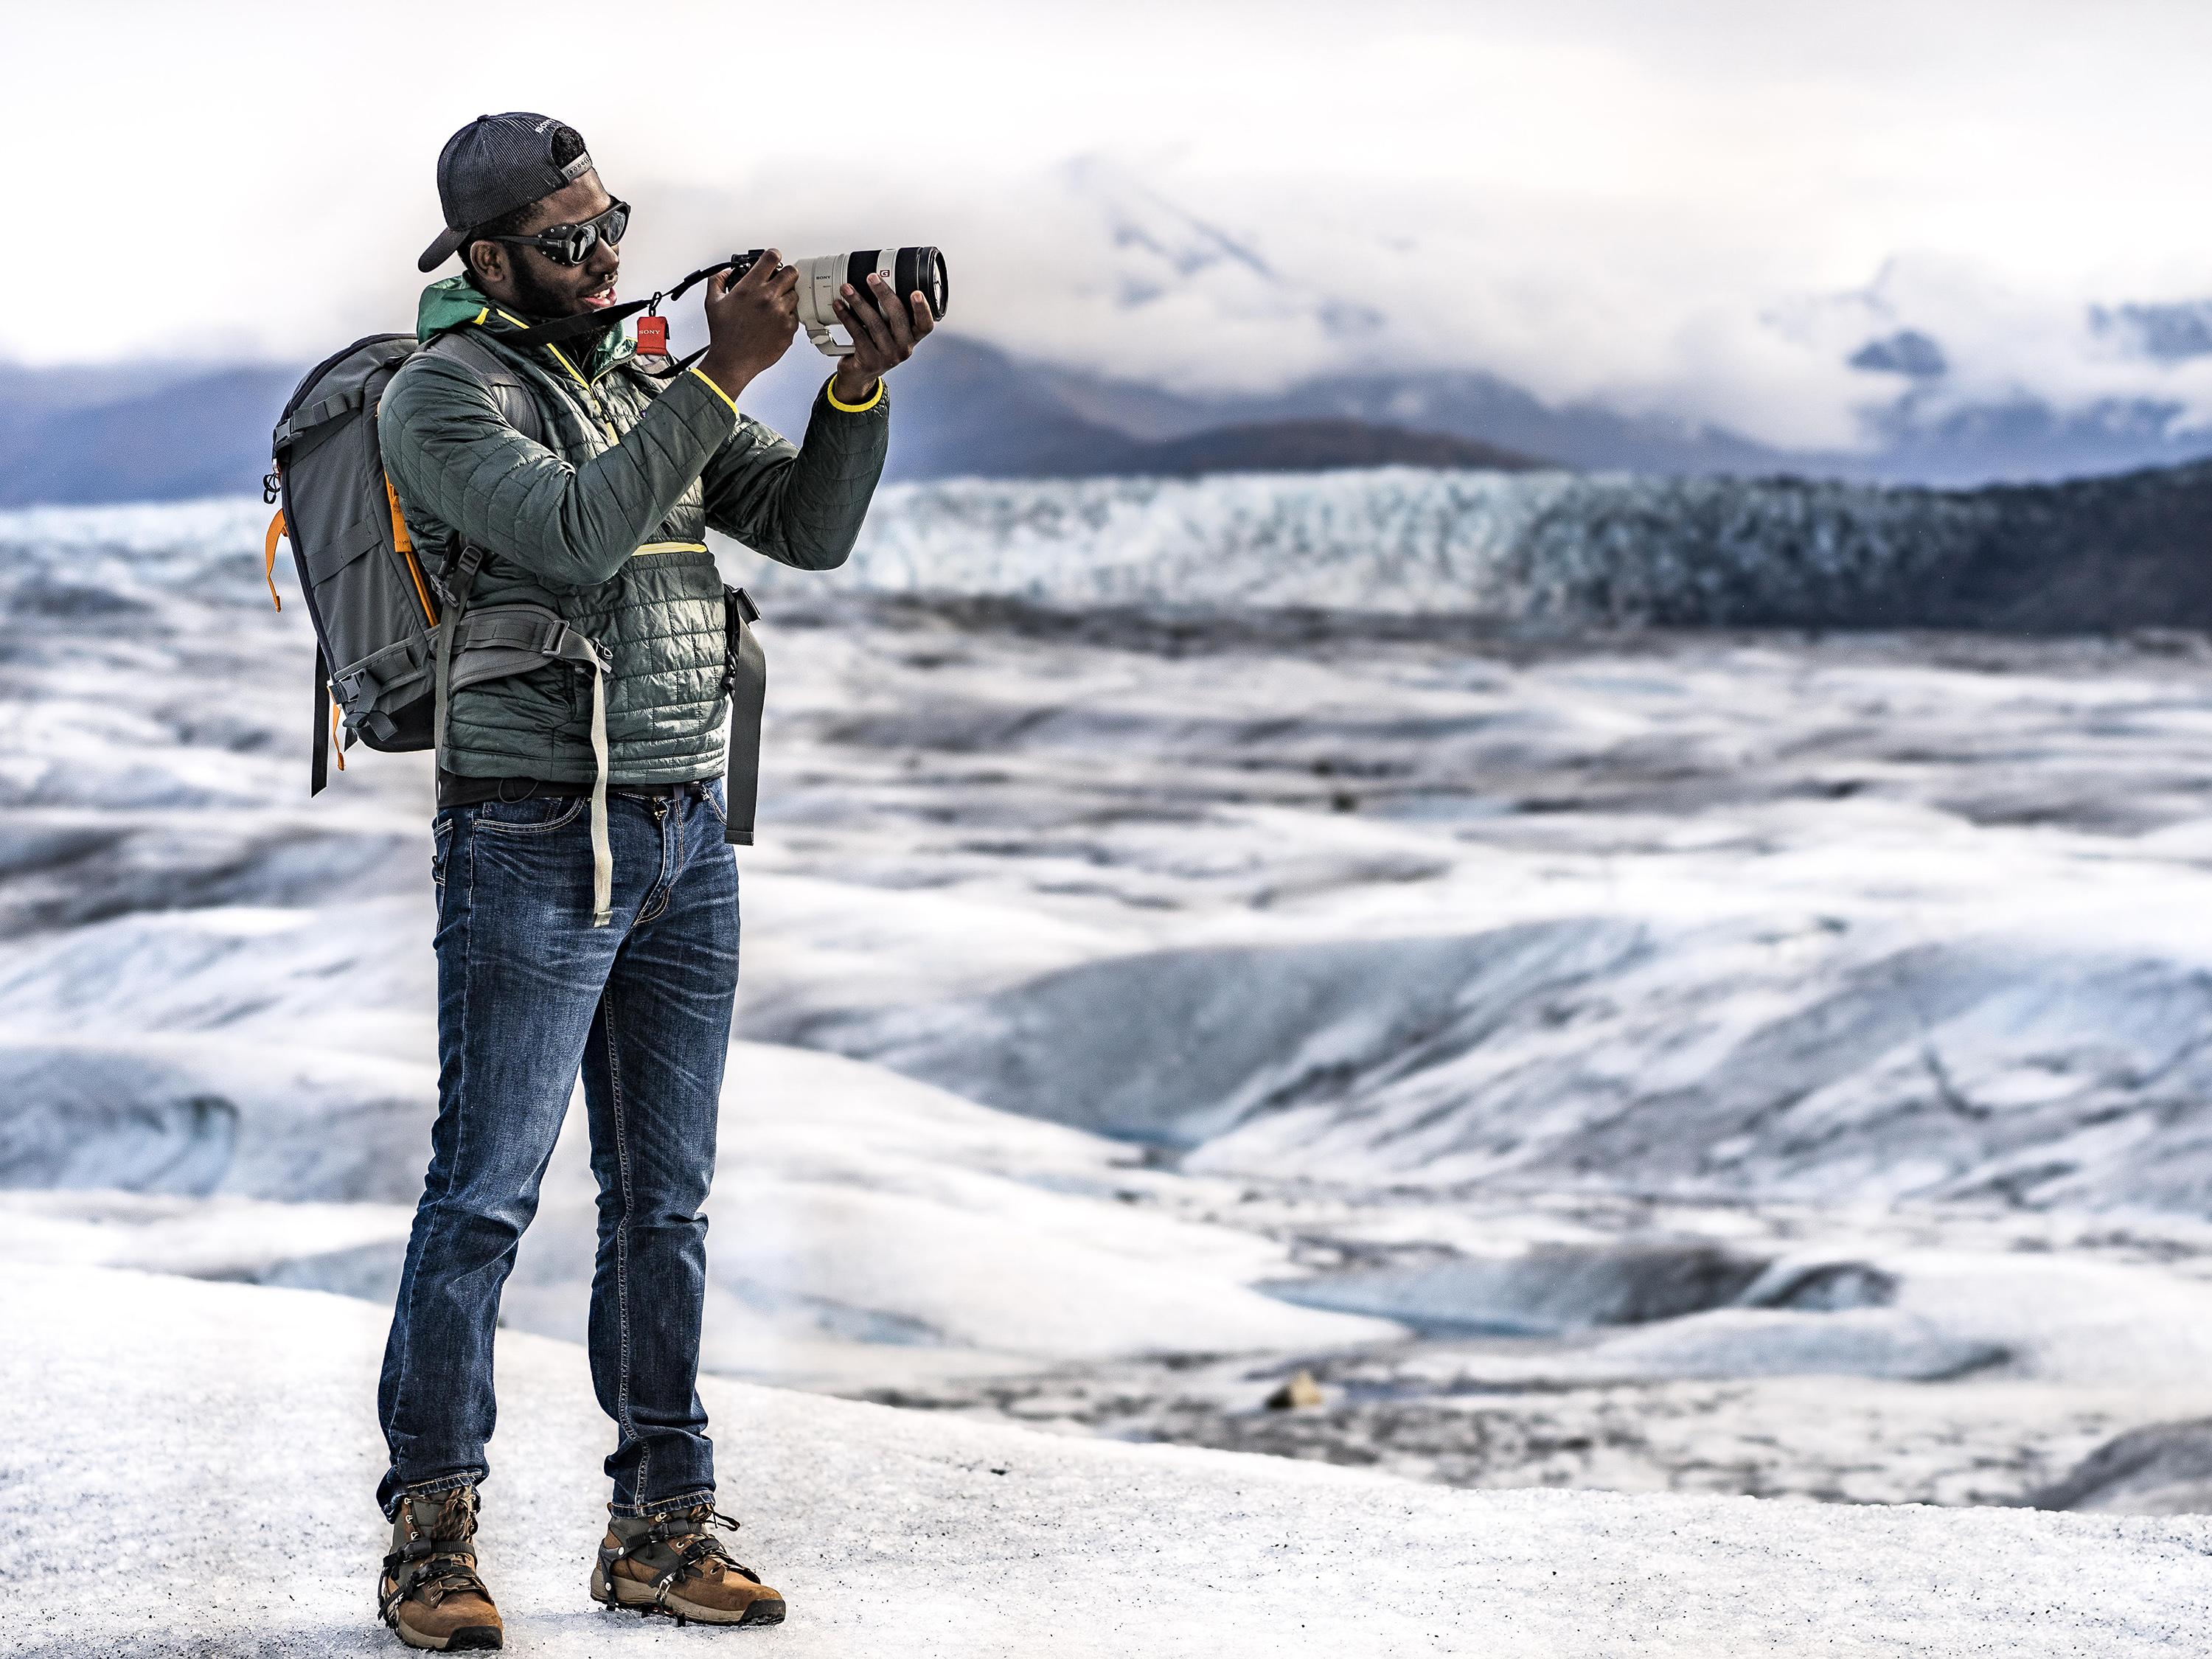 Mic-Anthony Hay takes photographs on a glacier in Alaska